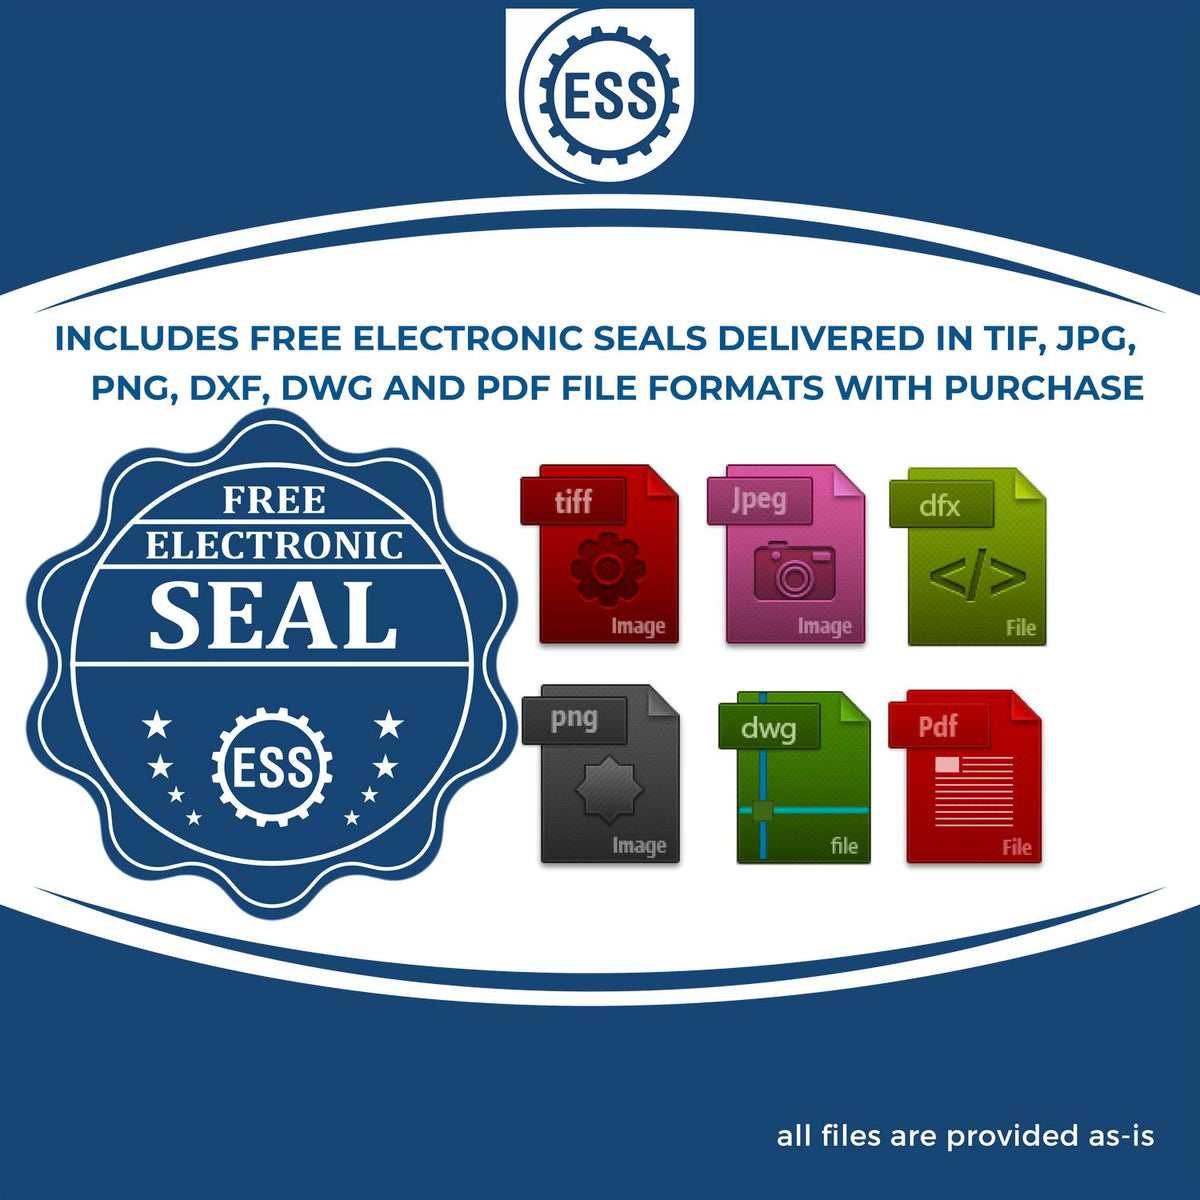 An infographic for the free electronic seal for the PSI South Dakota Notary Stamp illustrating the different file type icons such as DXF, DWG, TIF, JPG and PNG.